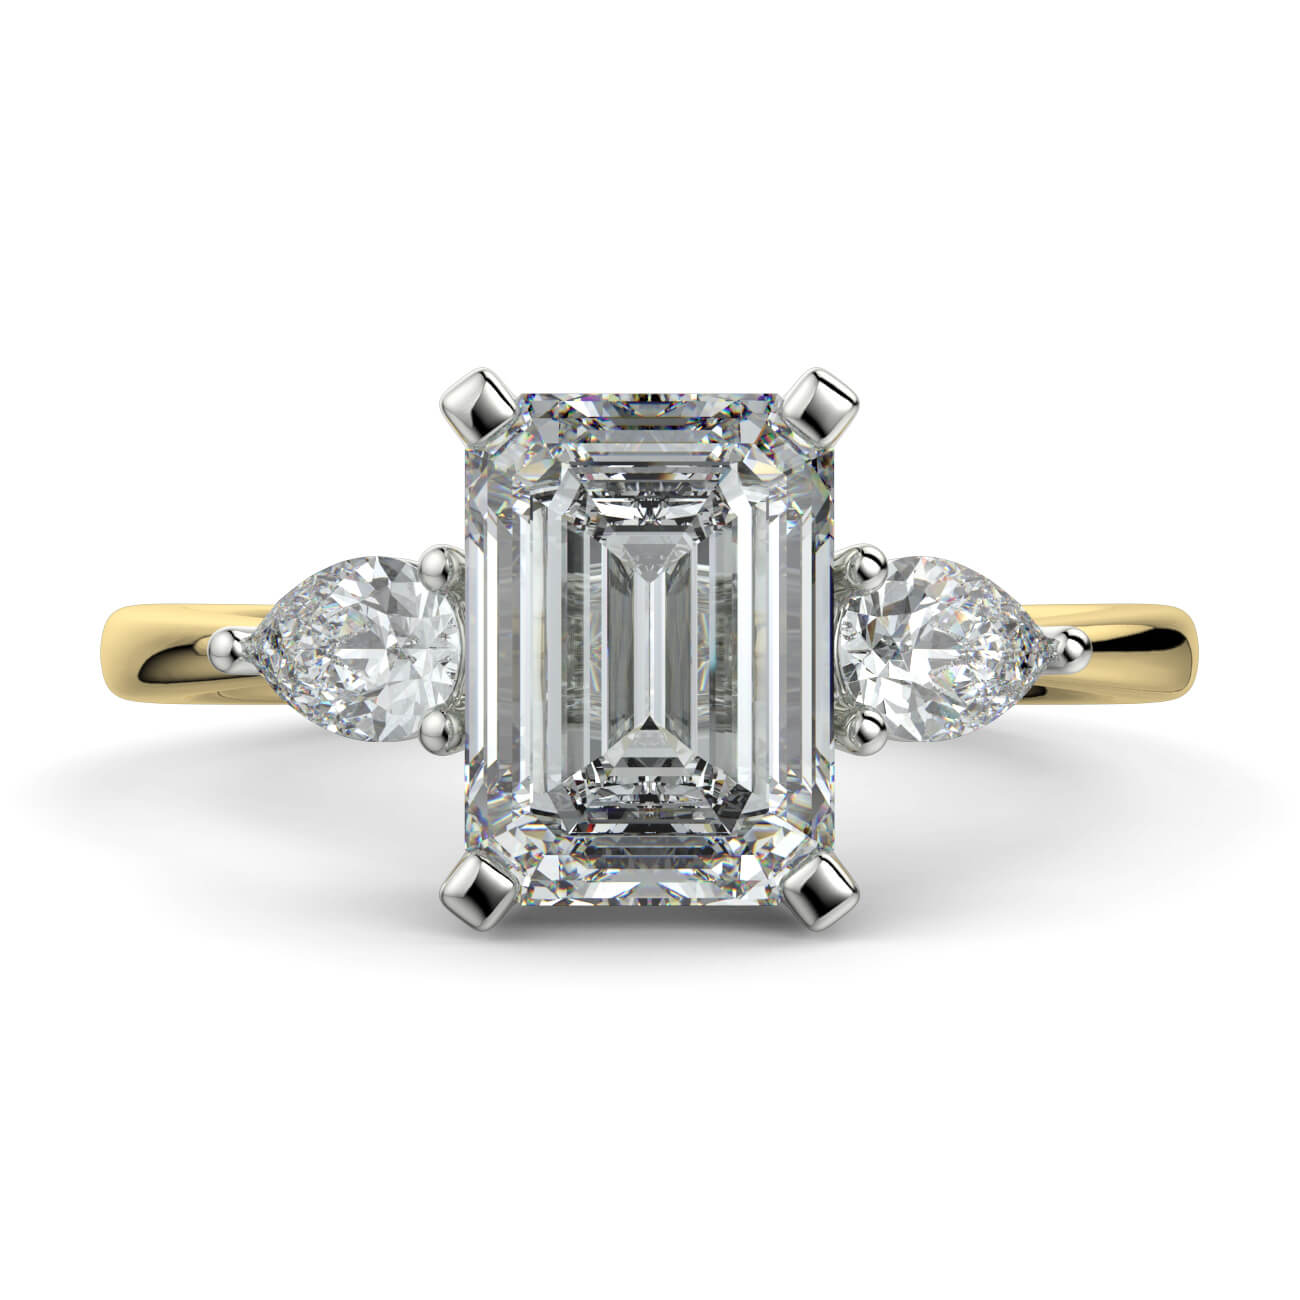 Emerald Cut Diamond Ring With Pear Shape Side Diamonds In Yellow and White Gold – Australian Diamond Network